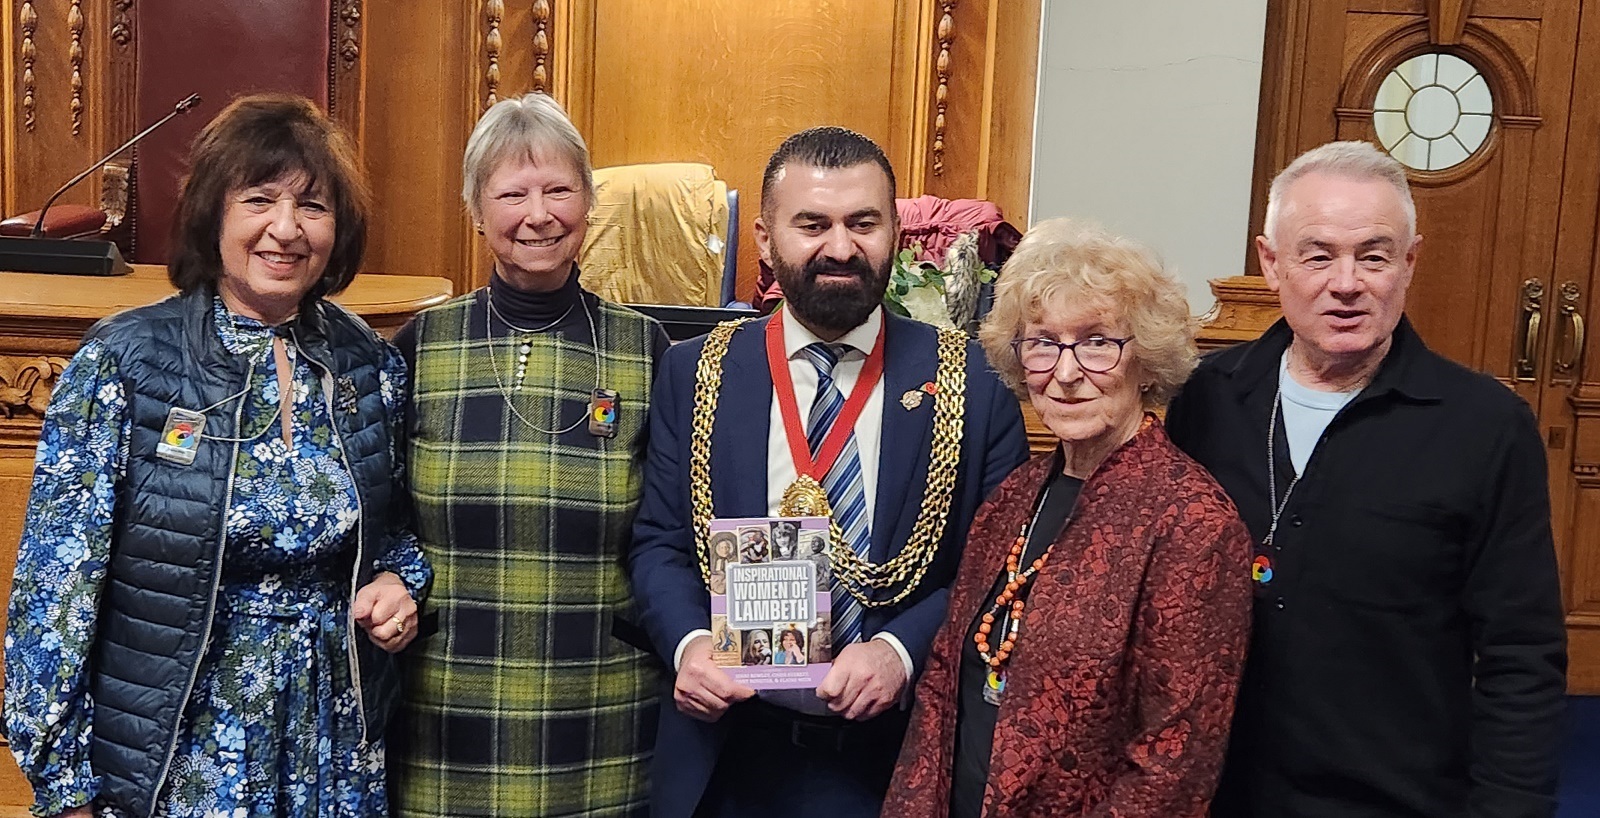 Lambeth Tour Guides with the Mayor of Lambeth & their book 'Inspirational Women of Lambeth'